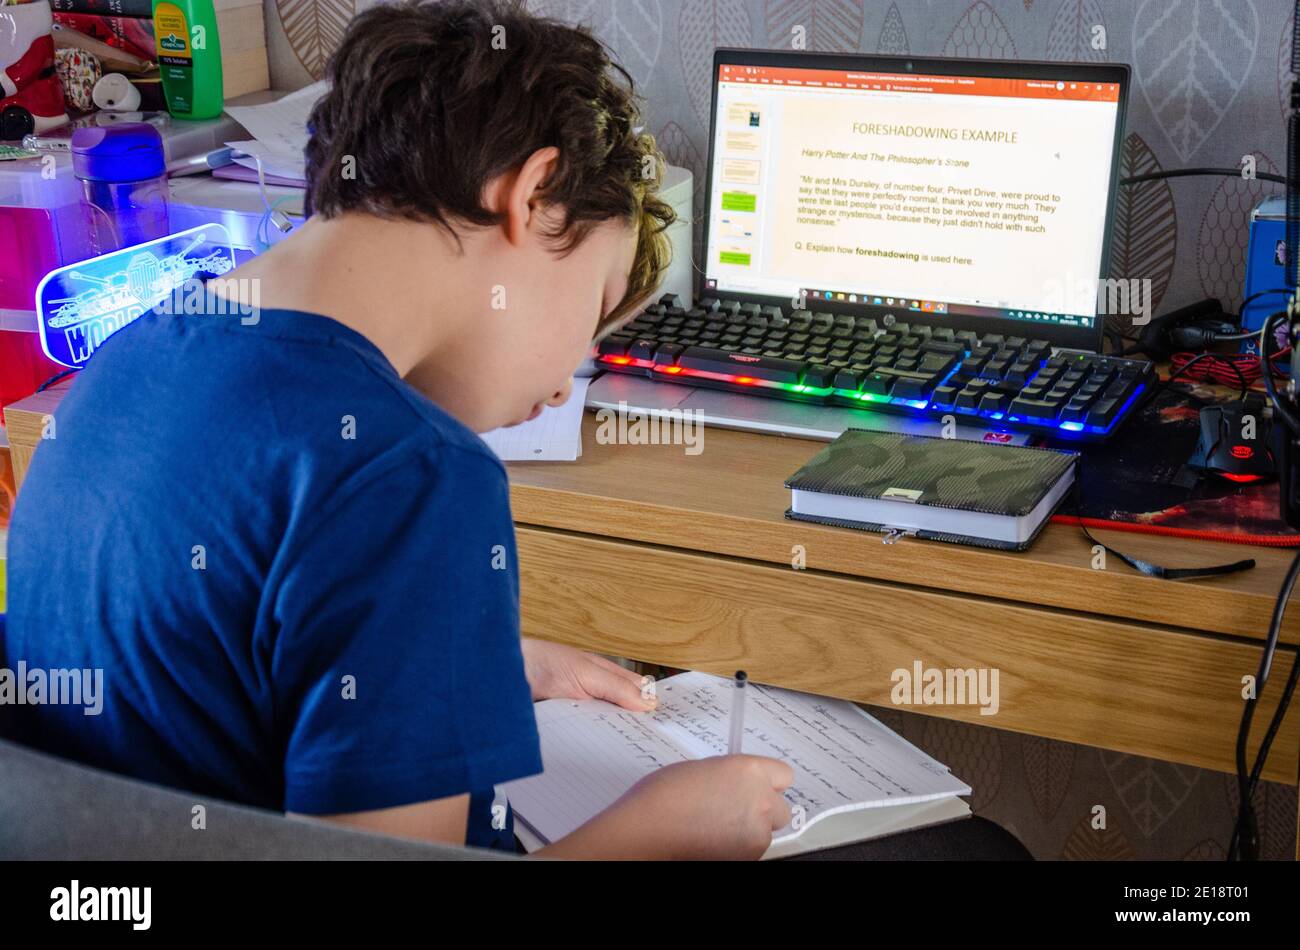 Reading, UK - 5th January 2021: Following the announcement by British Prime Minister Boris Johnson that England is to enter a new lockdown due to coronavirus, a secondary school child sits at home in front of the family laptop computer to do online learning. His school has sent lessons in the form of Microsoft PowerPoint presentations and communicates with children via tools such as Microsoft Teams. Stock Photo